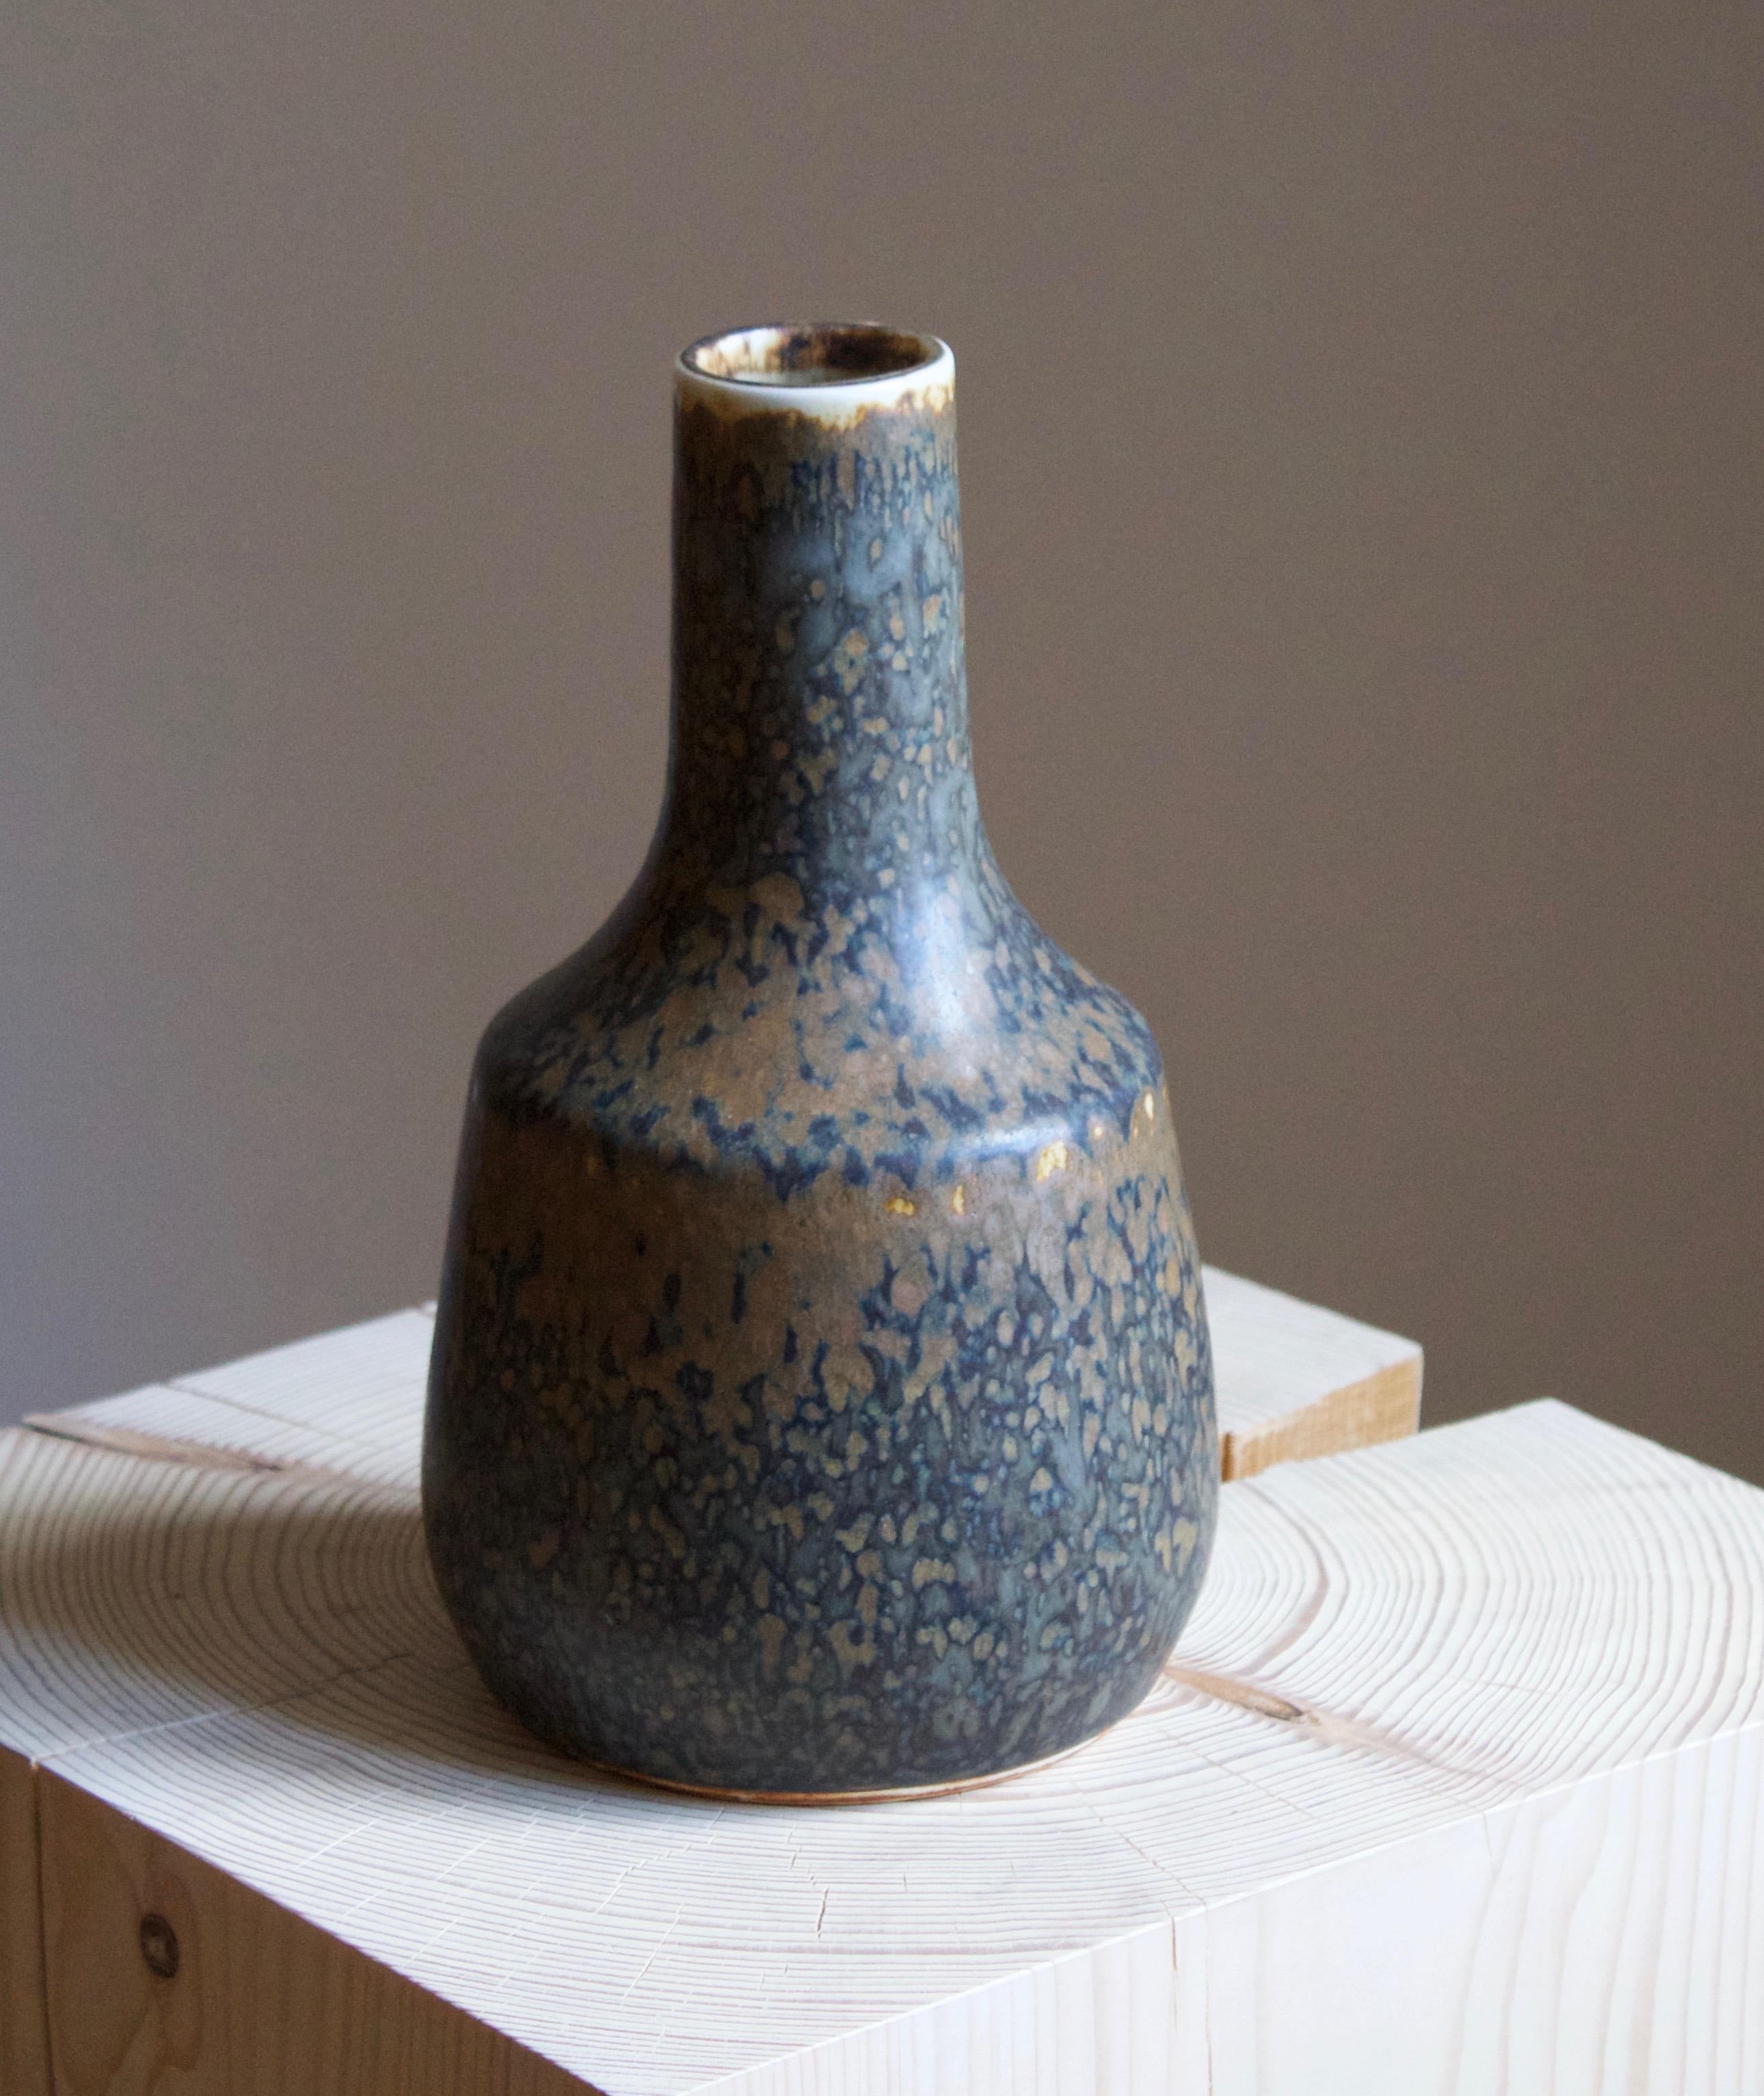 A stoneware vase or vessel designed by Carl-Harry Stålhane produced by Rörstrand, signed, likely produced 1960s. 

Other designers of the period include Axel Salto, Hans Cooper, Wilhelm Kåge, and Lucie Rie.